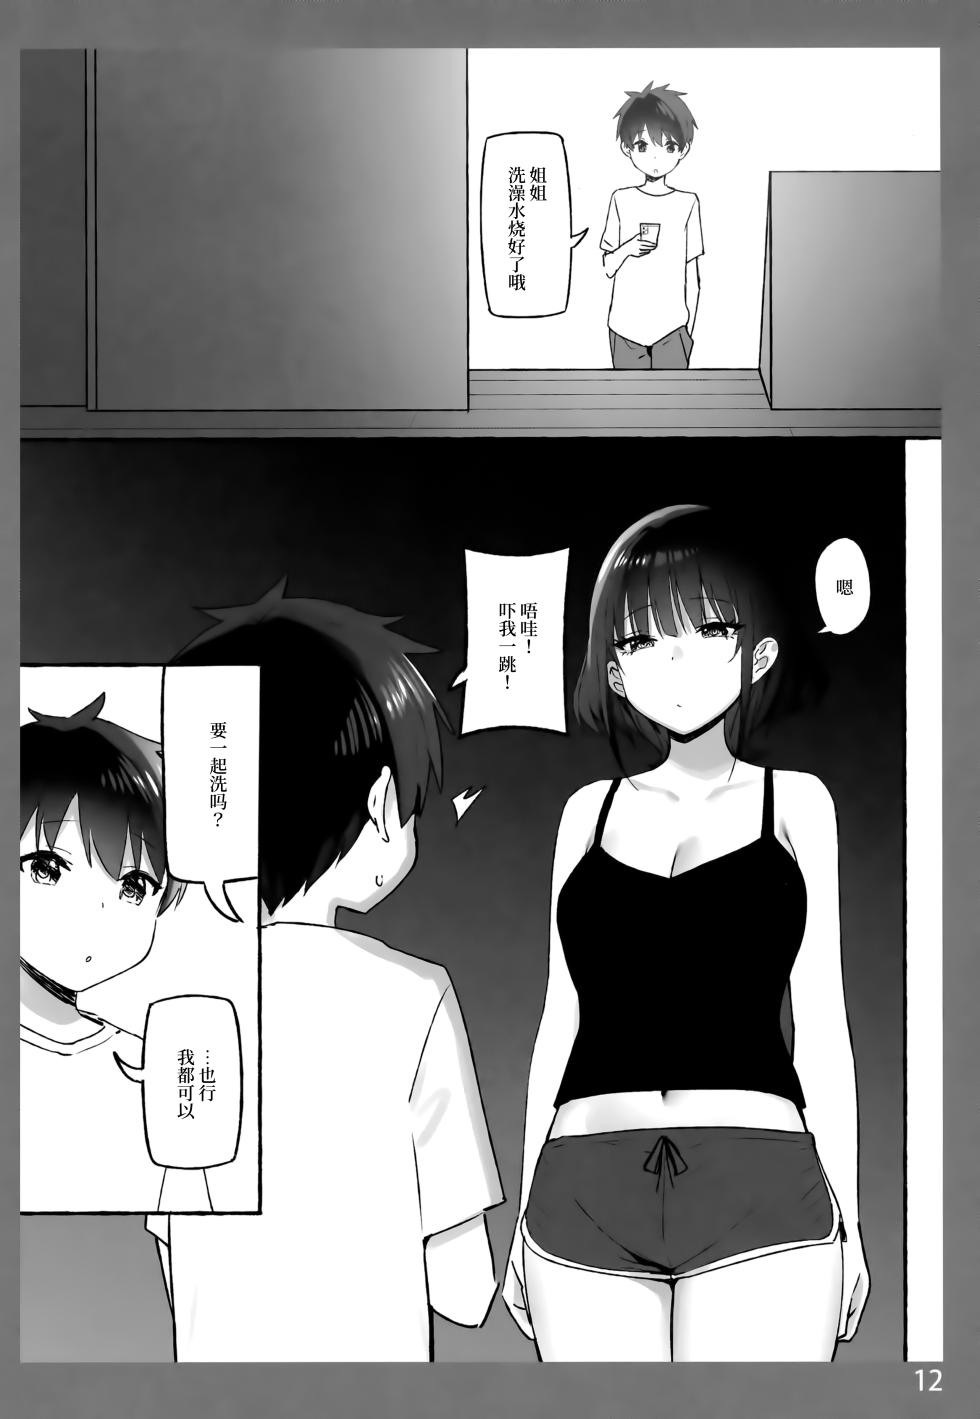 [Candy Club (Sky)] Onee-chan to Torokeru Kimochi SP | The Melting Feeling with Onee-chan SP [Chinese] [白杨汉化组] - Page 11